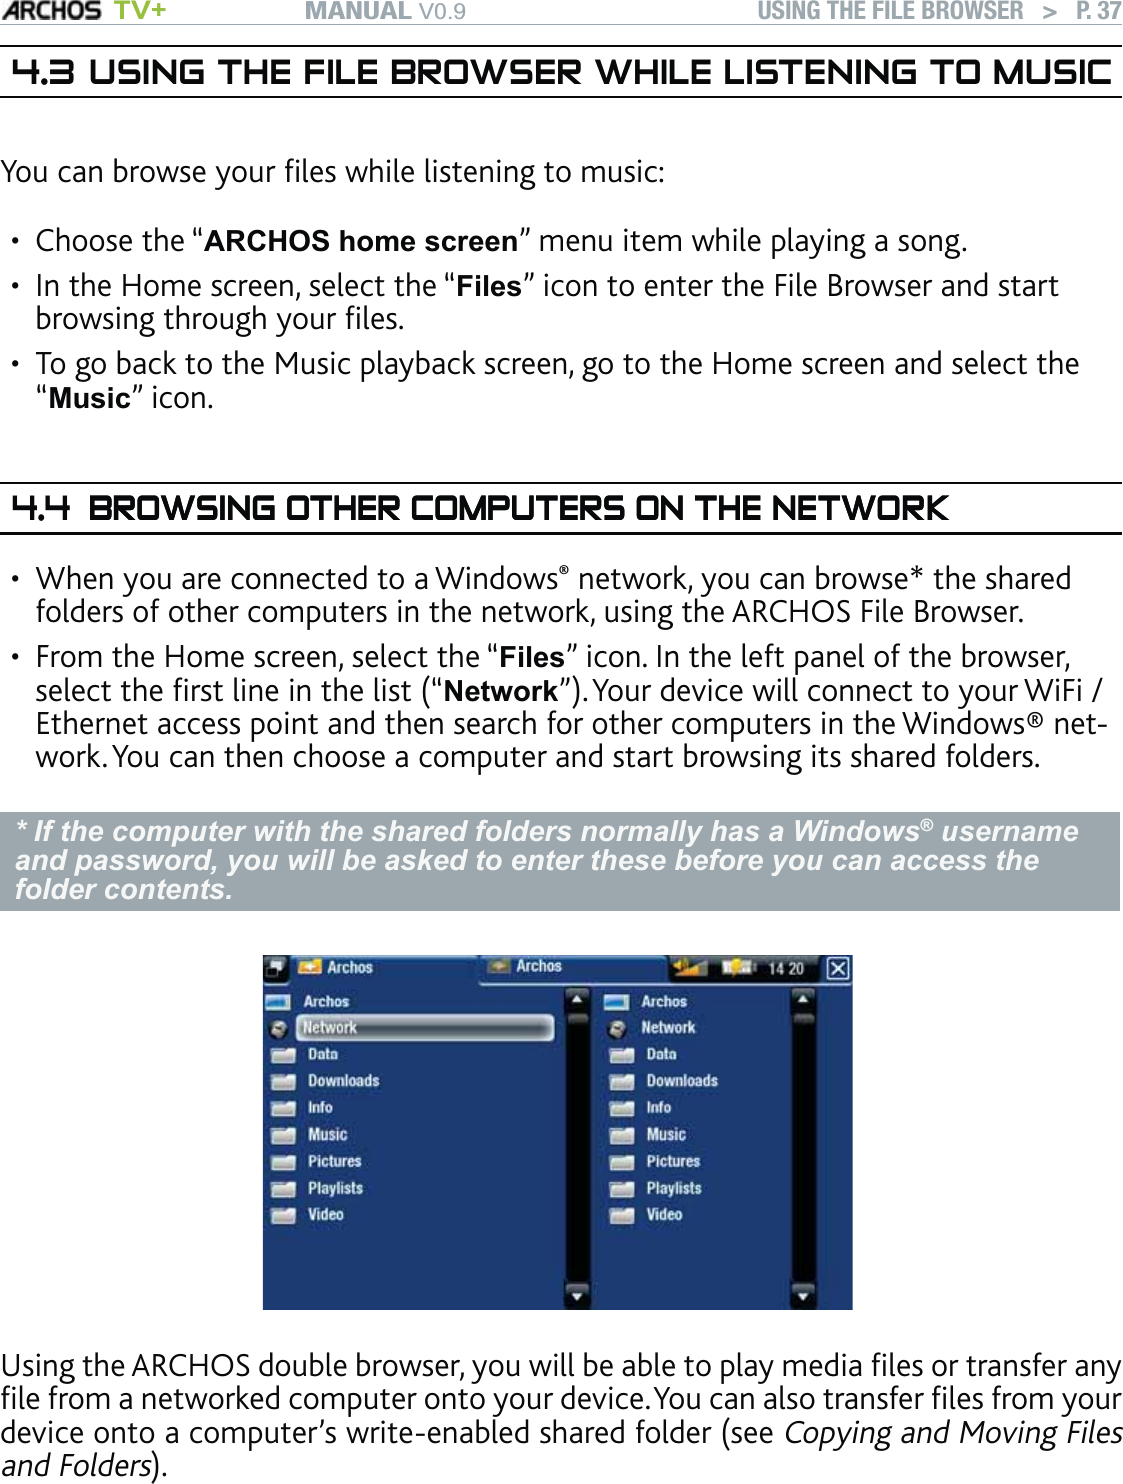 MANUAL V0.9 TV+ USING THE FILE BROWSER   &gt;   P. 374.3 USING THE FILE BROWSER WHILE LISTENING TO MUSICYou can browse your ﬁles while listening to music:Choose the “ARCHOS home screen” menu item while playing a song.In the Home screen, select the “Files” icon to enter the File Browser and start browsing through your ﬁles.To go back to the Music playback screen, go to the Home screen and select the  “Music” icon.4.4 BROWSING OTHER COMPUTERS ON THE NETWORKBROWSING OTHER COMPUTERS ON THE NETWORKWhen you are connected to a Windows® network, you can browse* the shared folders of other computers in the network, using the ARCHOS File Browser.From the Home screen, select the “Files” icon. In the left panel of the browser, select the ﬁrst line in the list (“Network”). Your device will connect to your WiFi / Ethernet access point and then search for other computers in the Windows® net-work. You can then choose a computer and start browsing its shared folders.* If the computer with the shared folders normally has a Windows® username and password, you will be asked to enter these before you can access the folder contents.Using the ARCHOS double browser, you will be able to play media ﬁles or transfer any ﬁle from a networked computer onto your device. You can also transfer ﬁles from your device onto a computer’s write-enabled shared folder (see Copying and Moving Files and Folders).If the WiFi / Ethernet is not enabled or if you are not connected to a network, the device will scan for available networks and connect to a known network or display the list of available networks so that you can connect to one of them.•••••